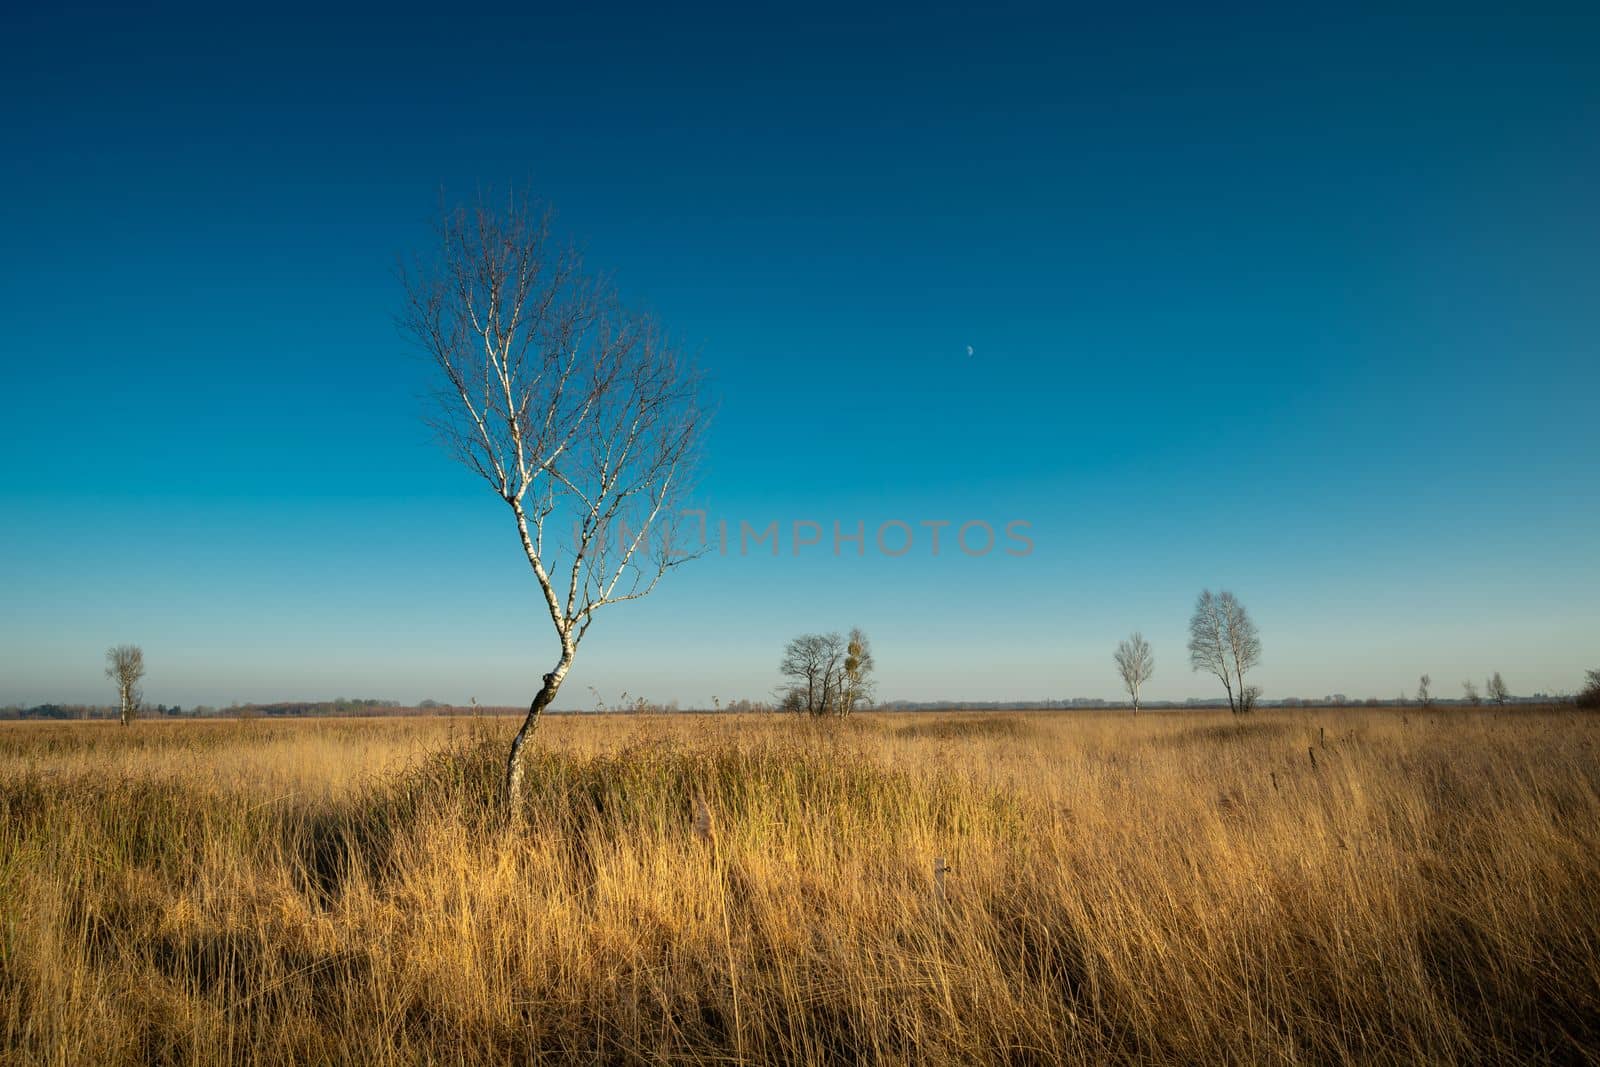 Birch without leaves in a meadow like a savannah by darekb22